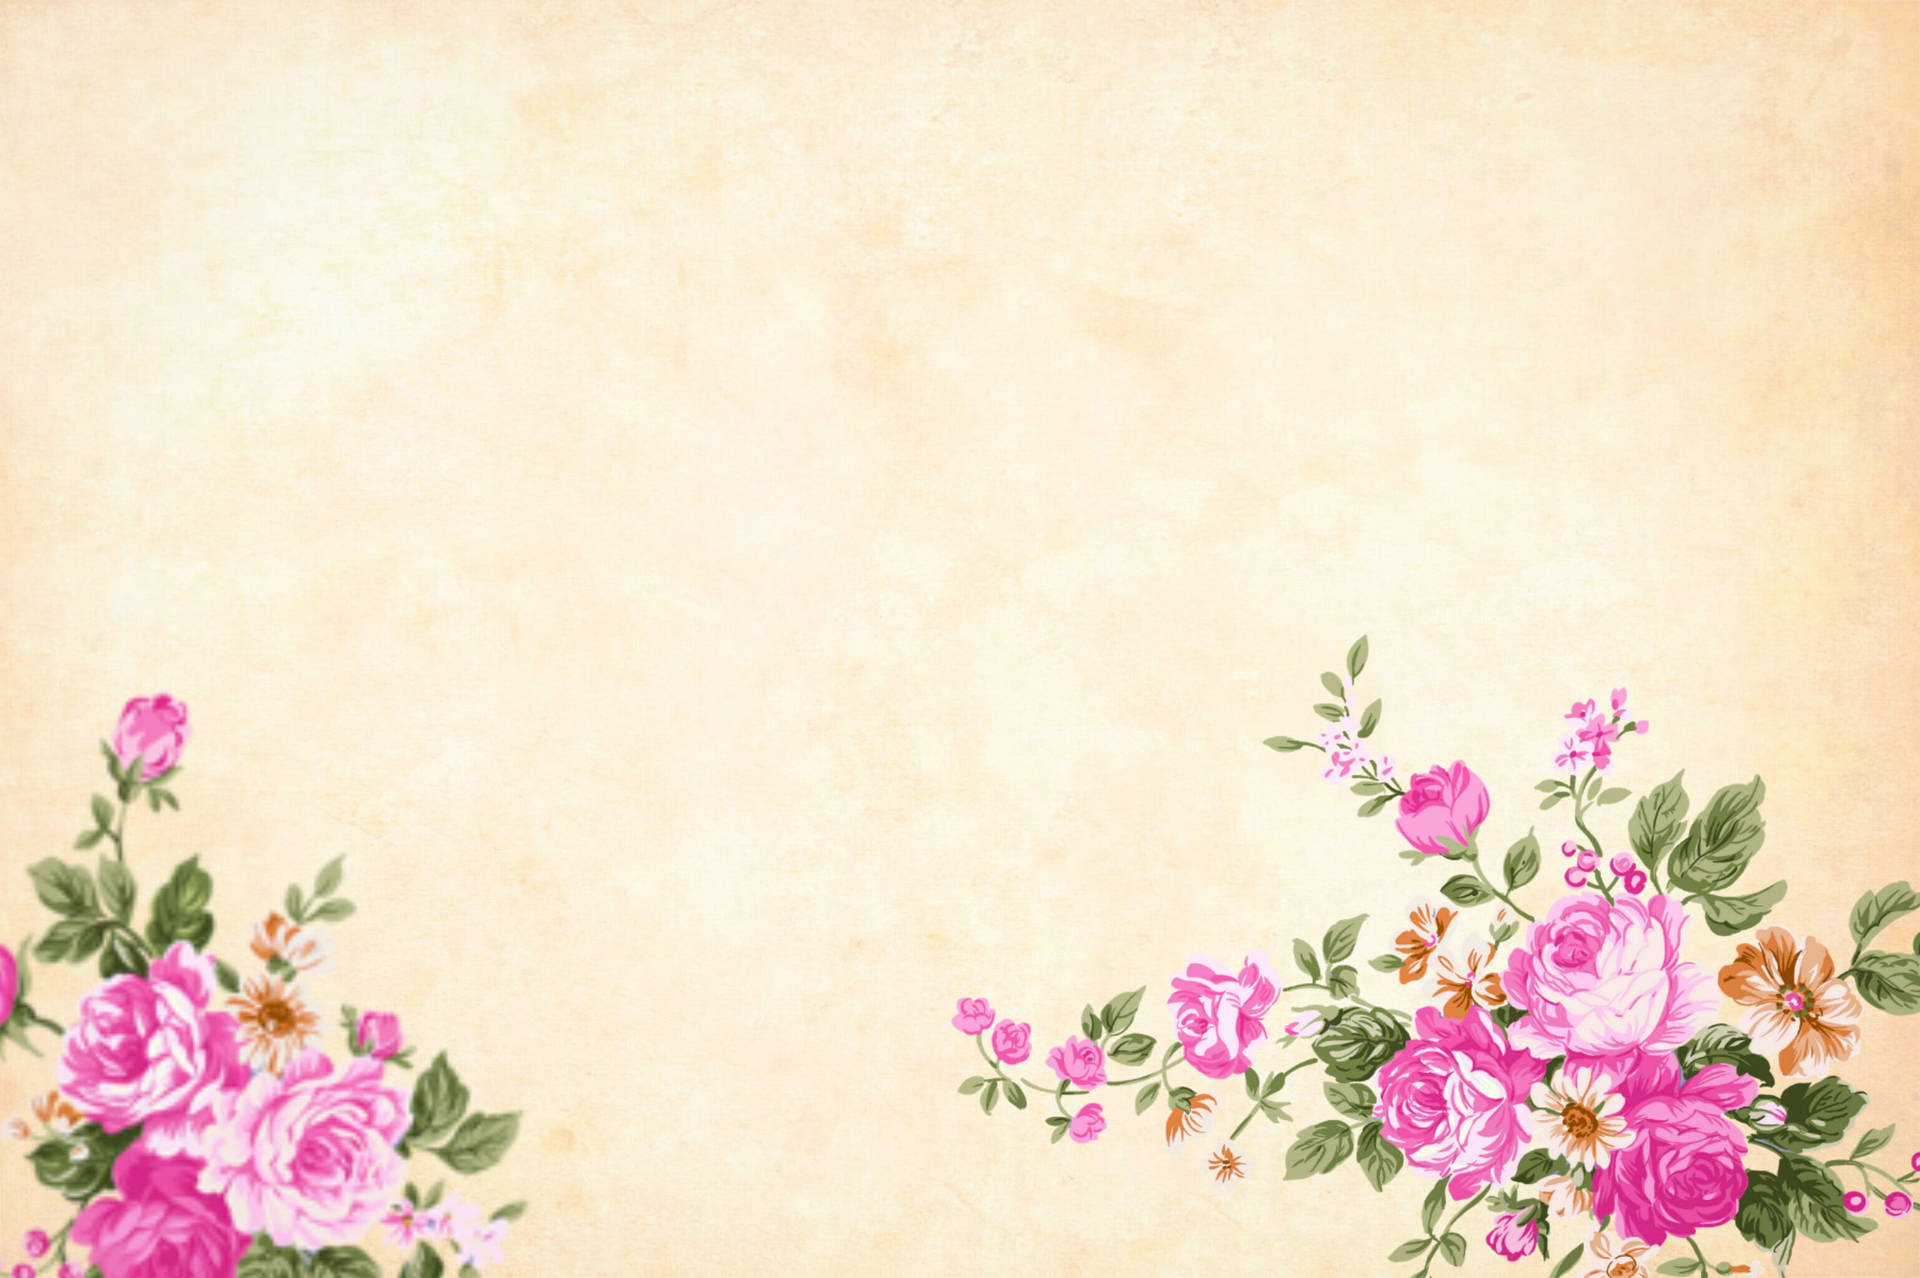 Background Design With Pink Flowers Background